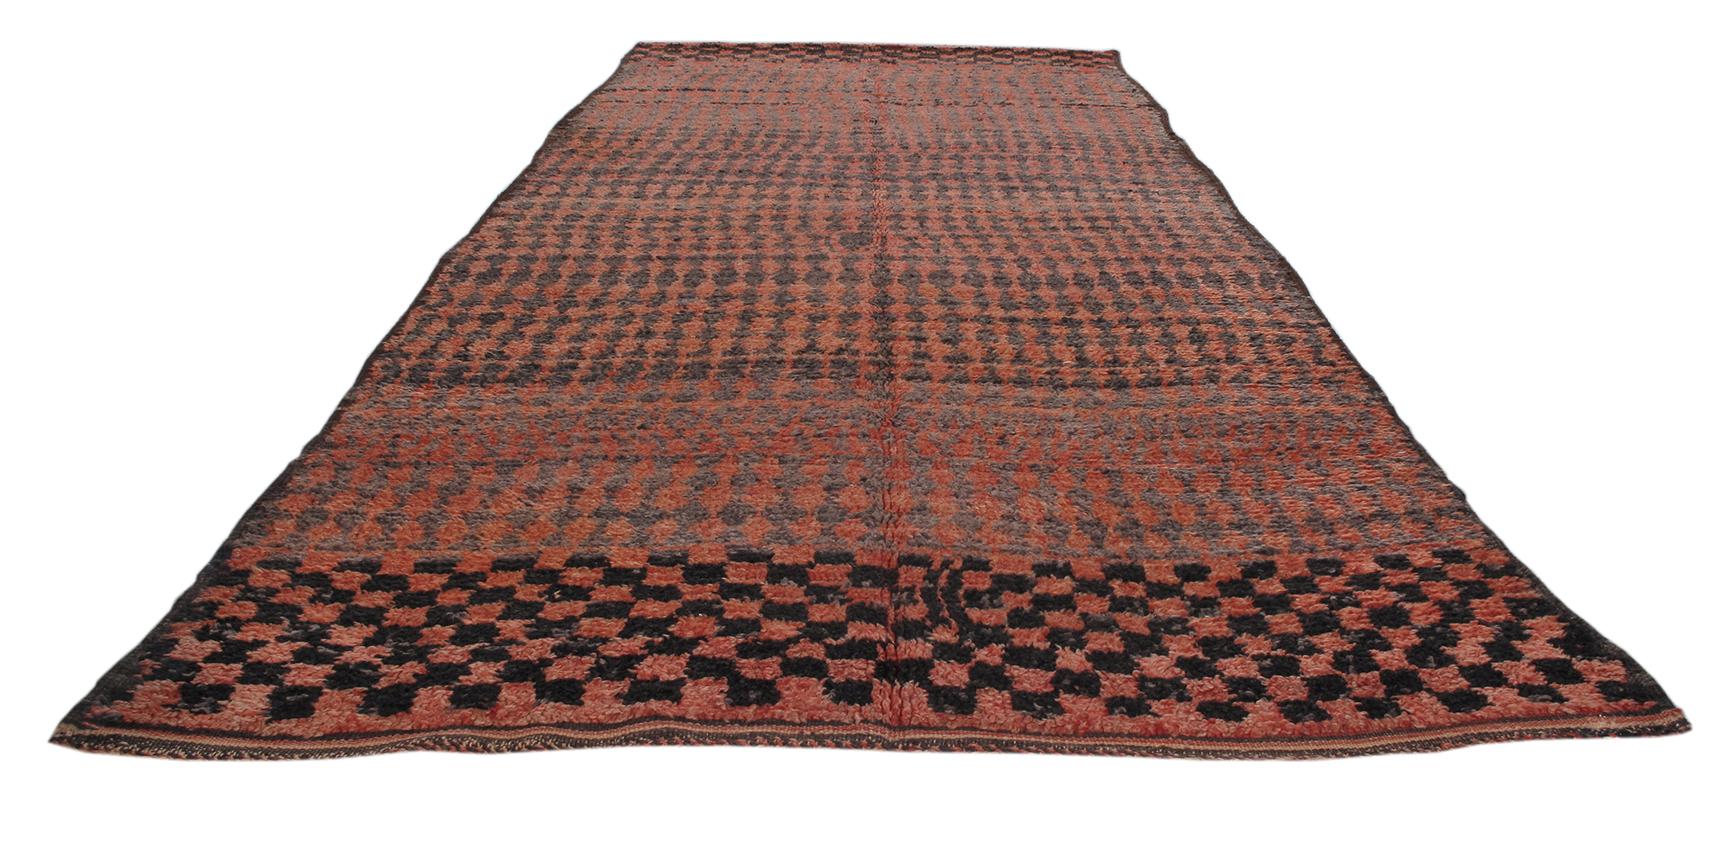 Tribal Vintage Moroccan Berber Hand Knotted Rug in Red and Black Checkered Design For Sale